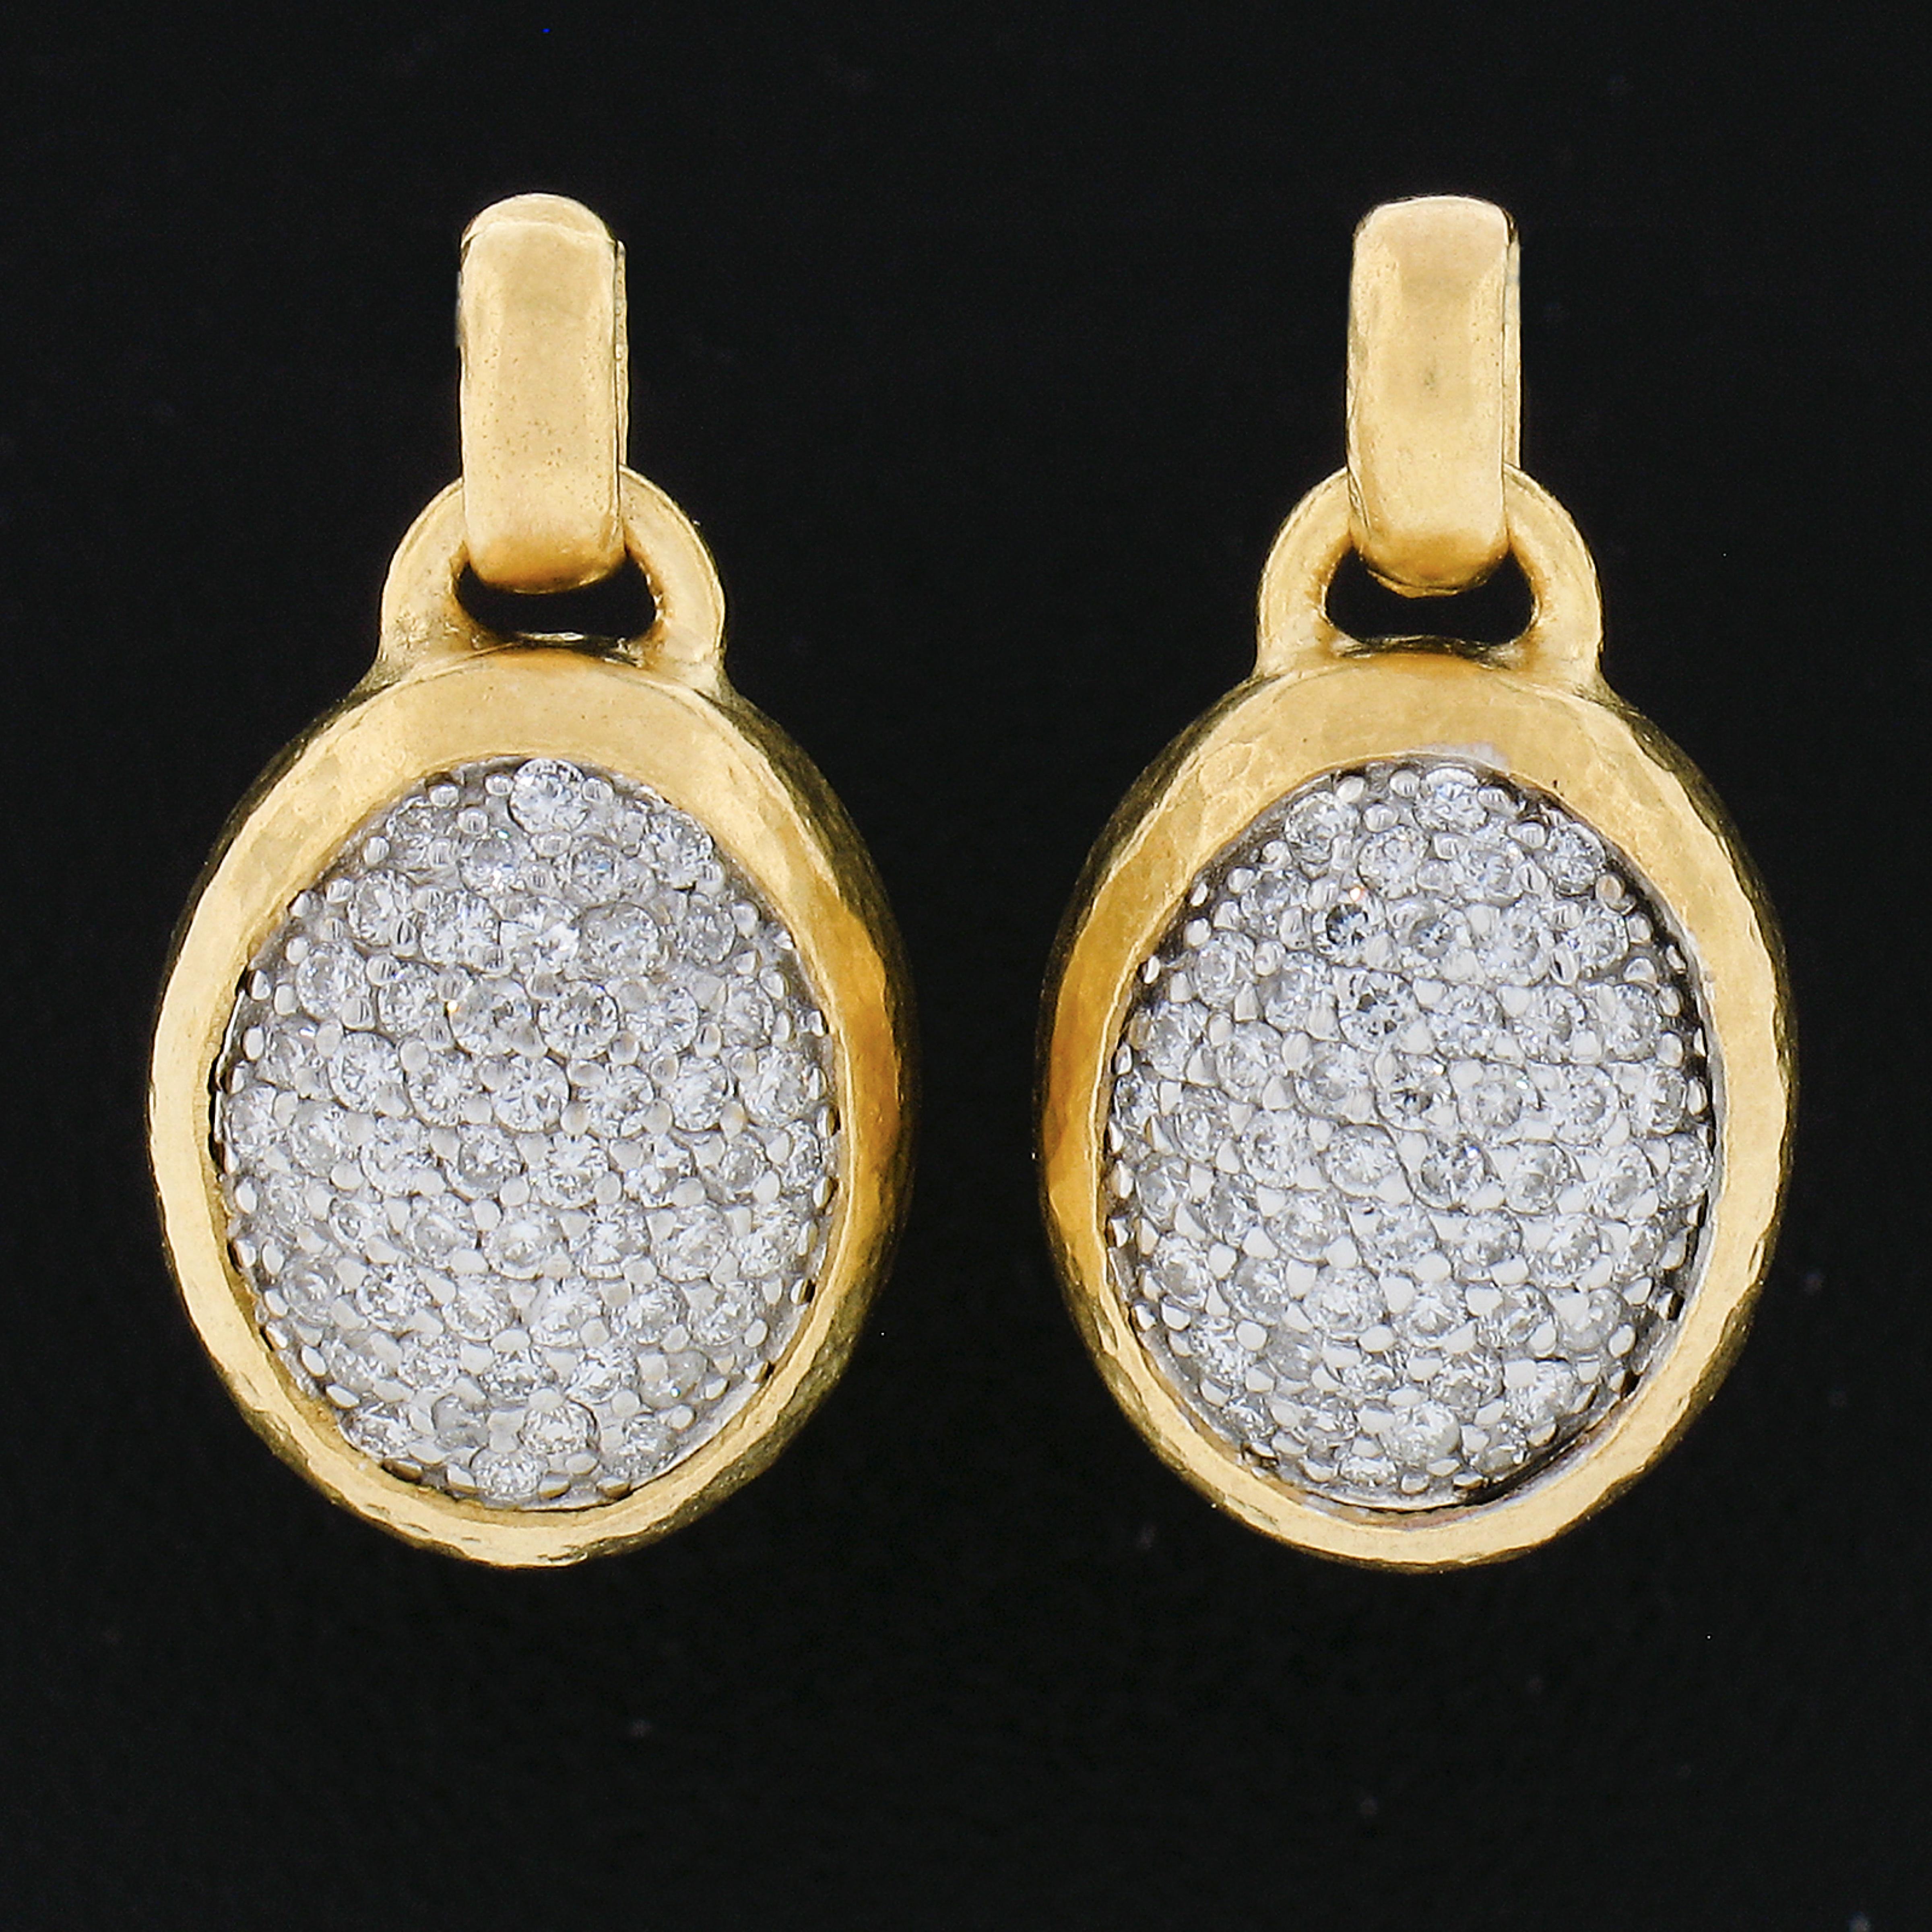 Here we have an absolutely elegant pair of pendants by GURHAN that are crafted in solid 24k yellow gold & 18k white gold at the center.  They feature an oval design adorned with numerous round brilliant cut natural diamonds totaling approximately